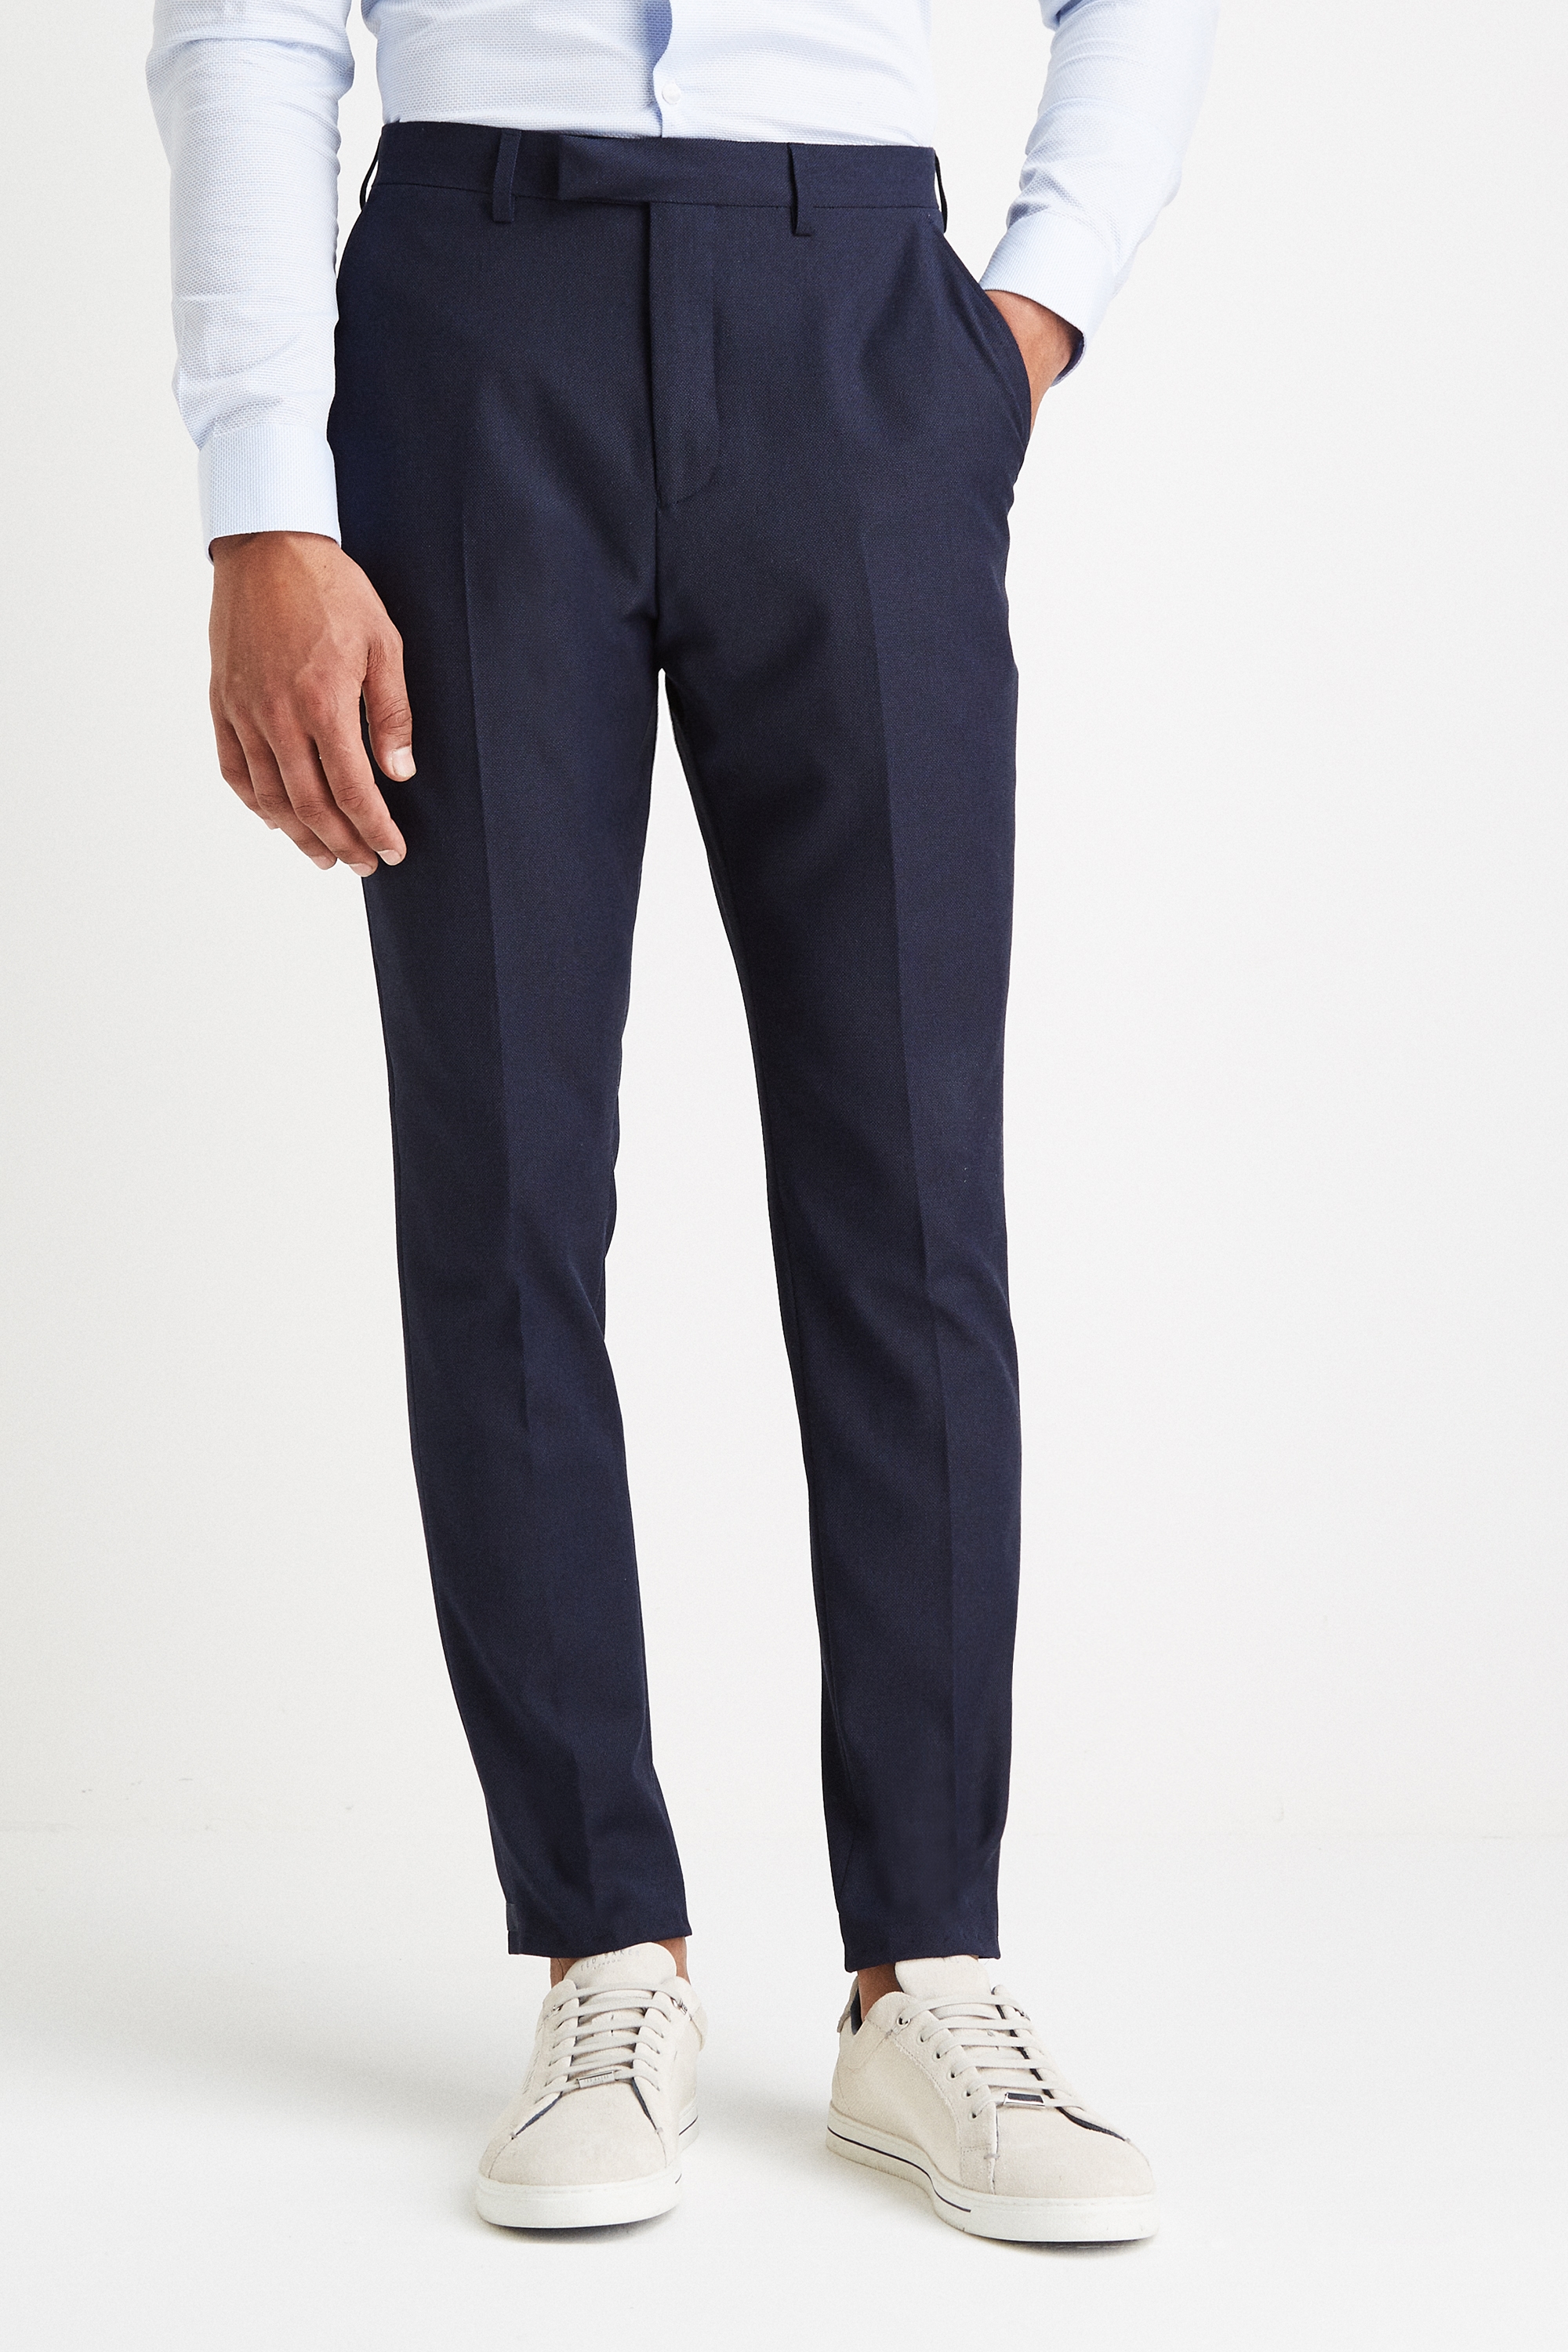 Moss London Slim Muscle Fit Navy Pindot Trousers